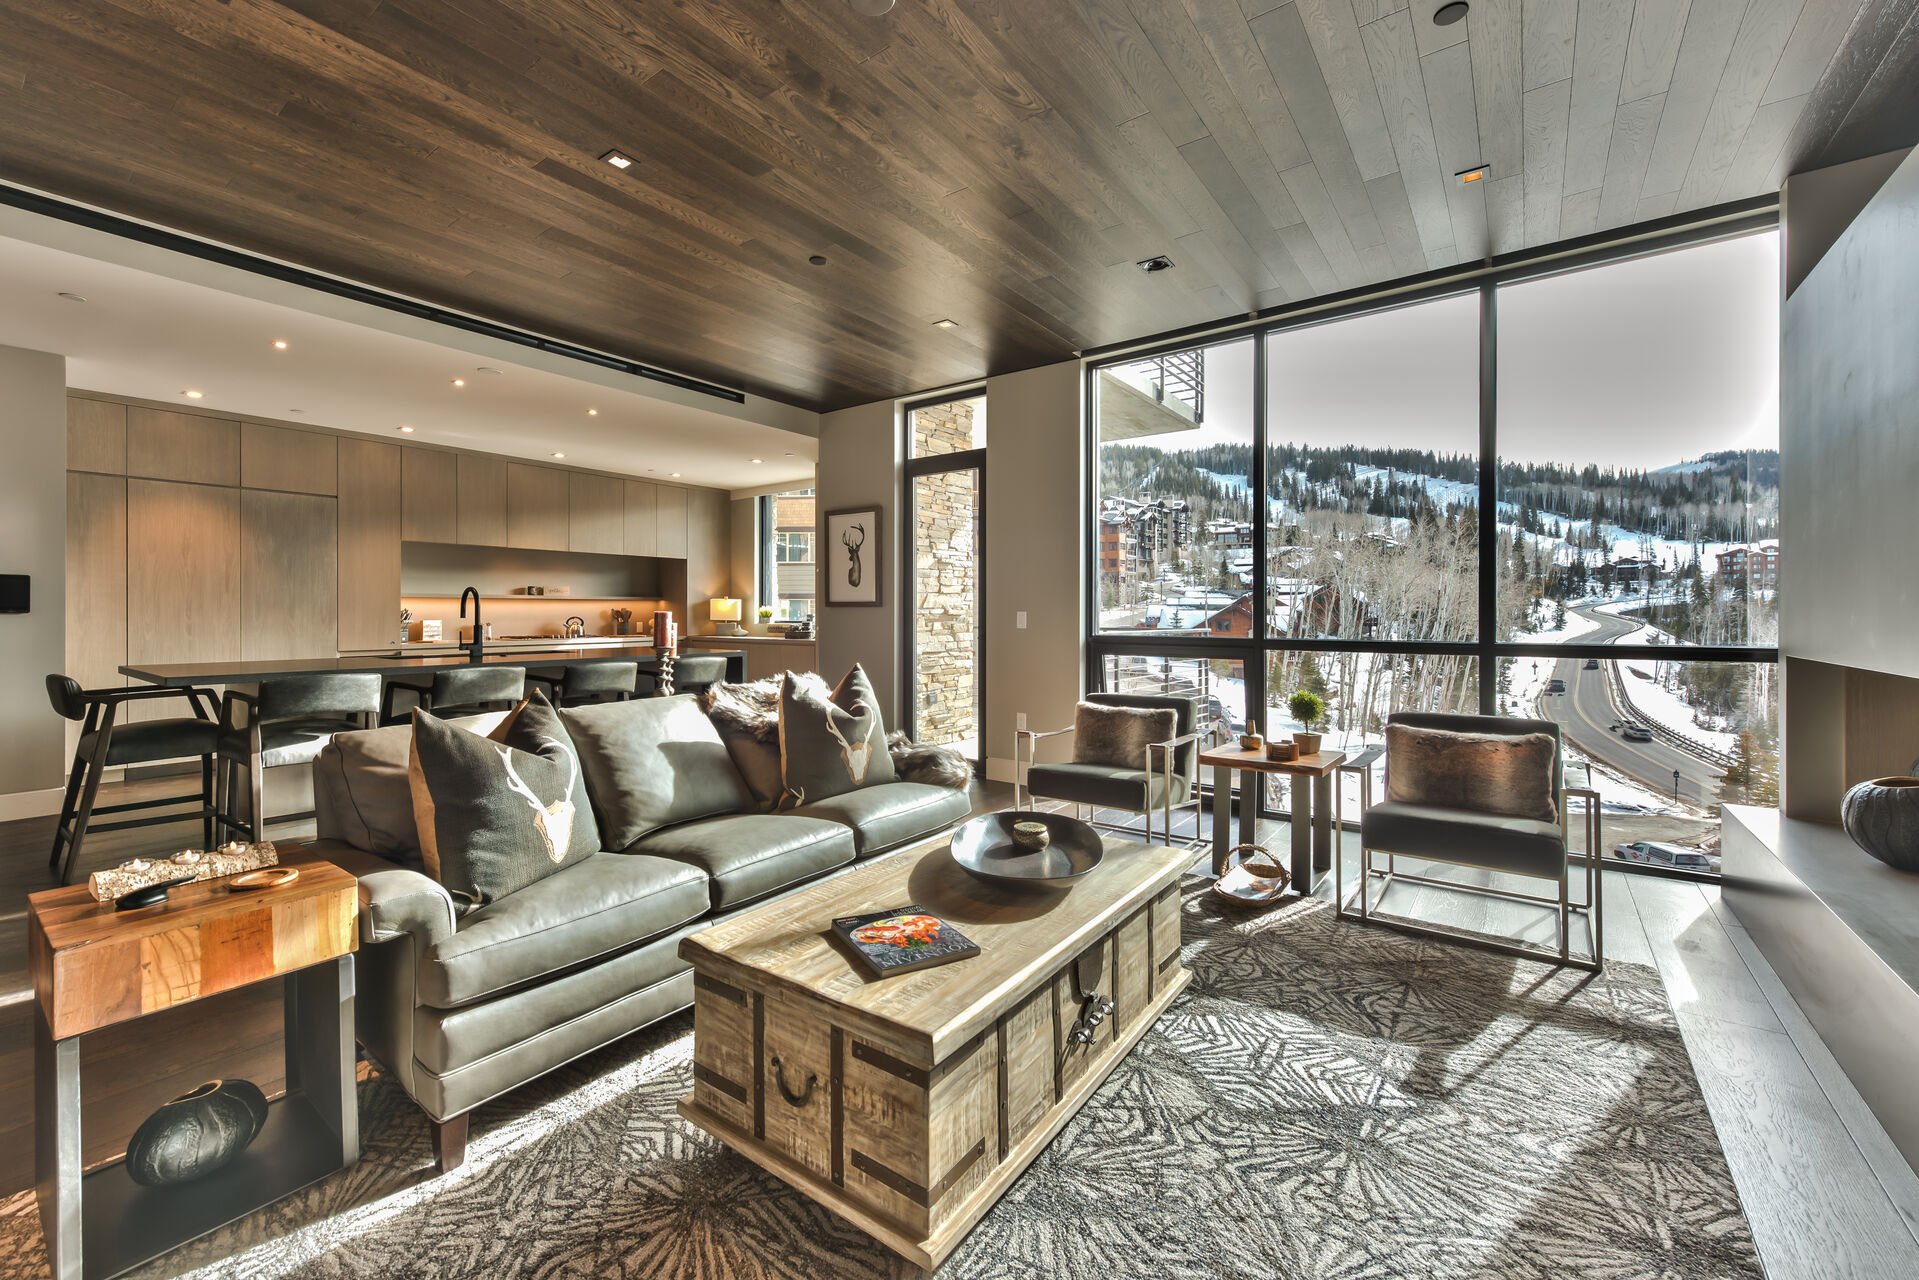 Living Room, Kitchen, Balcony Access and Floor to Ceiling Mountain Views